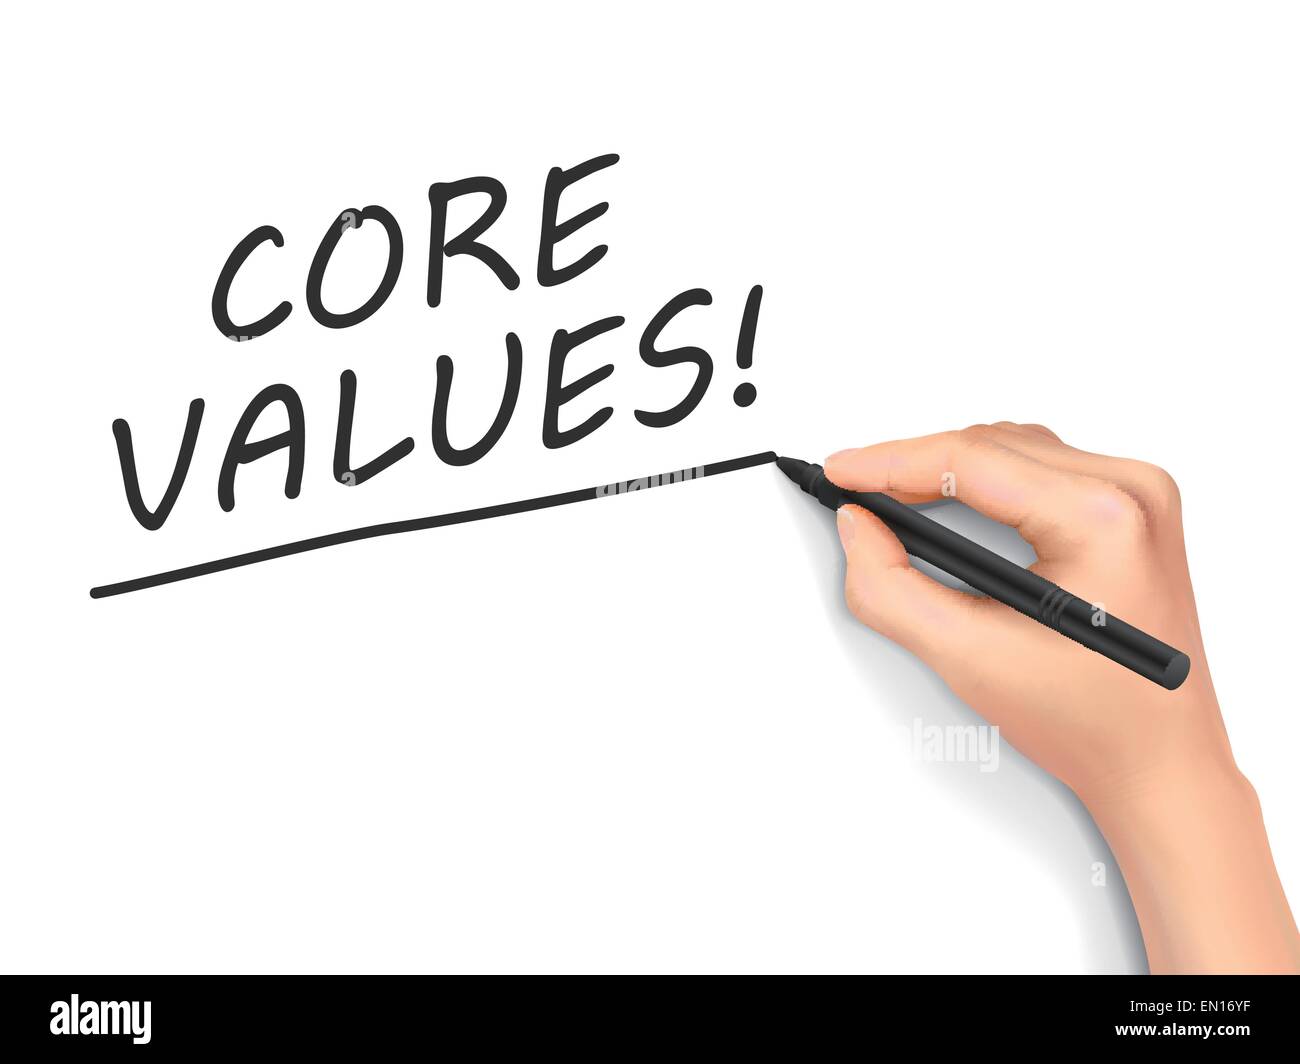 core values words written by hand on white background Stock Vector